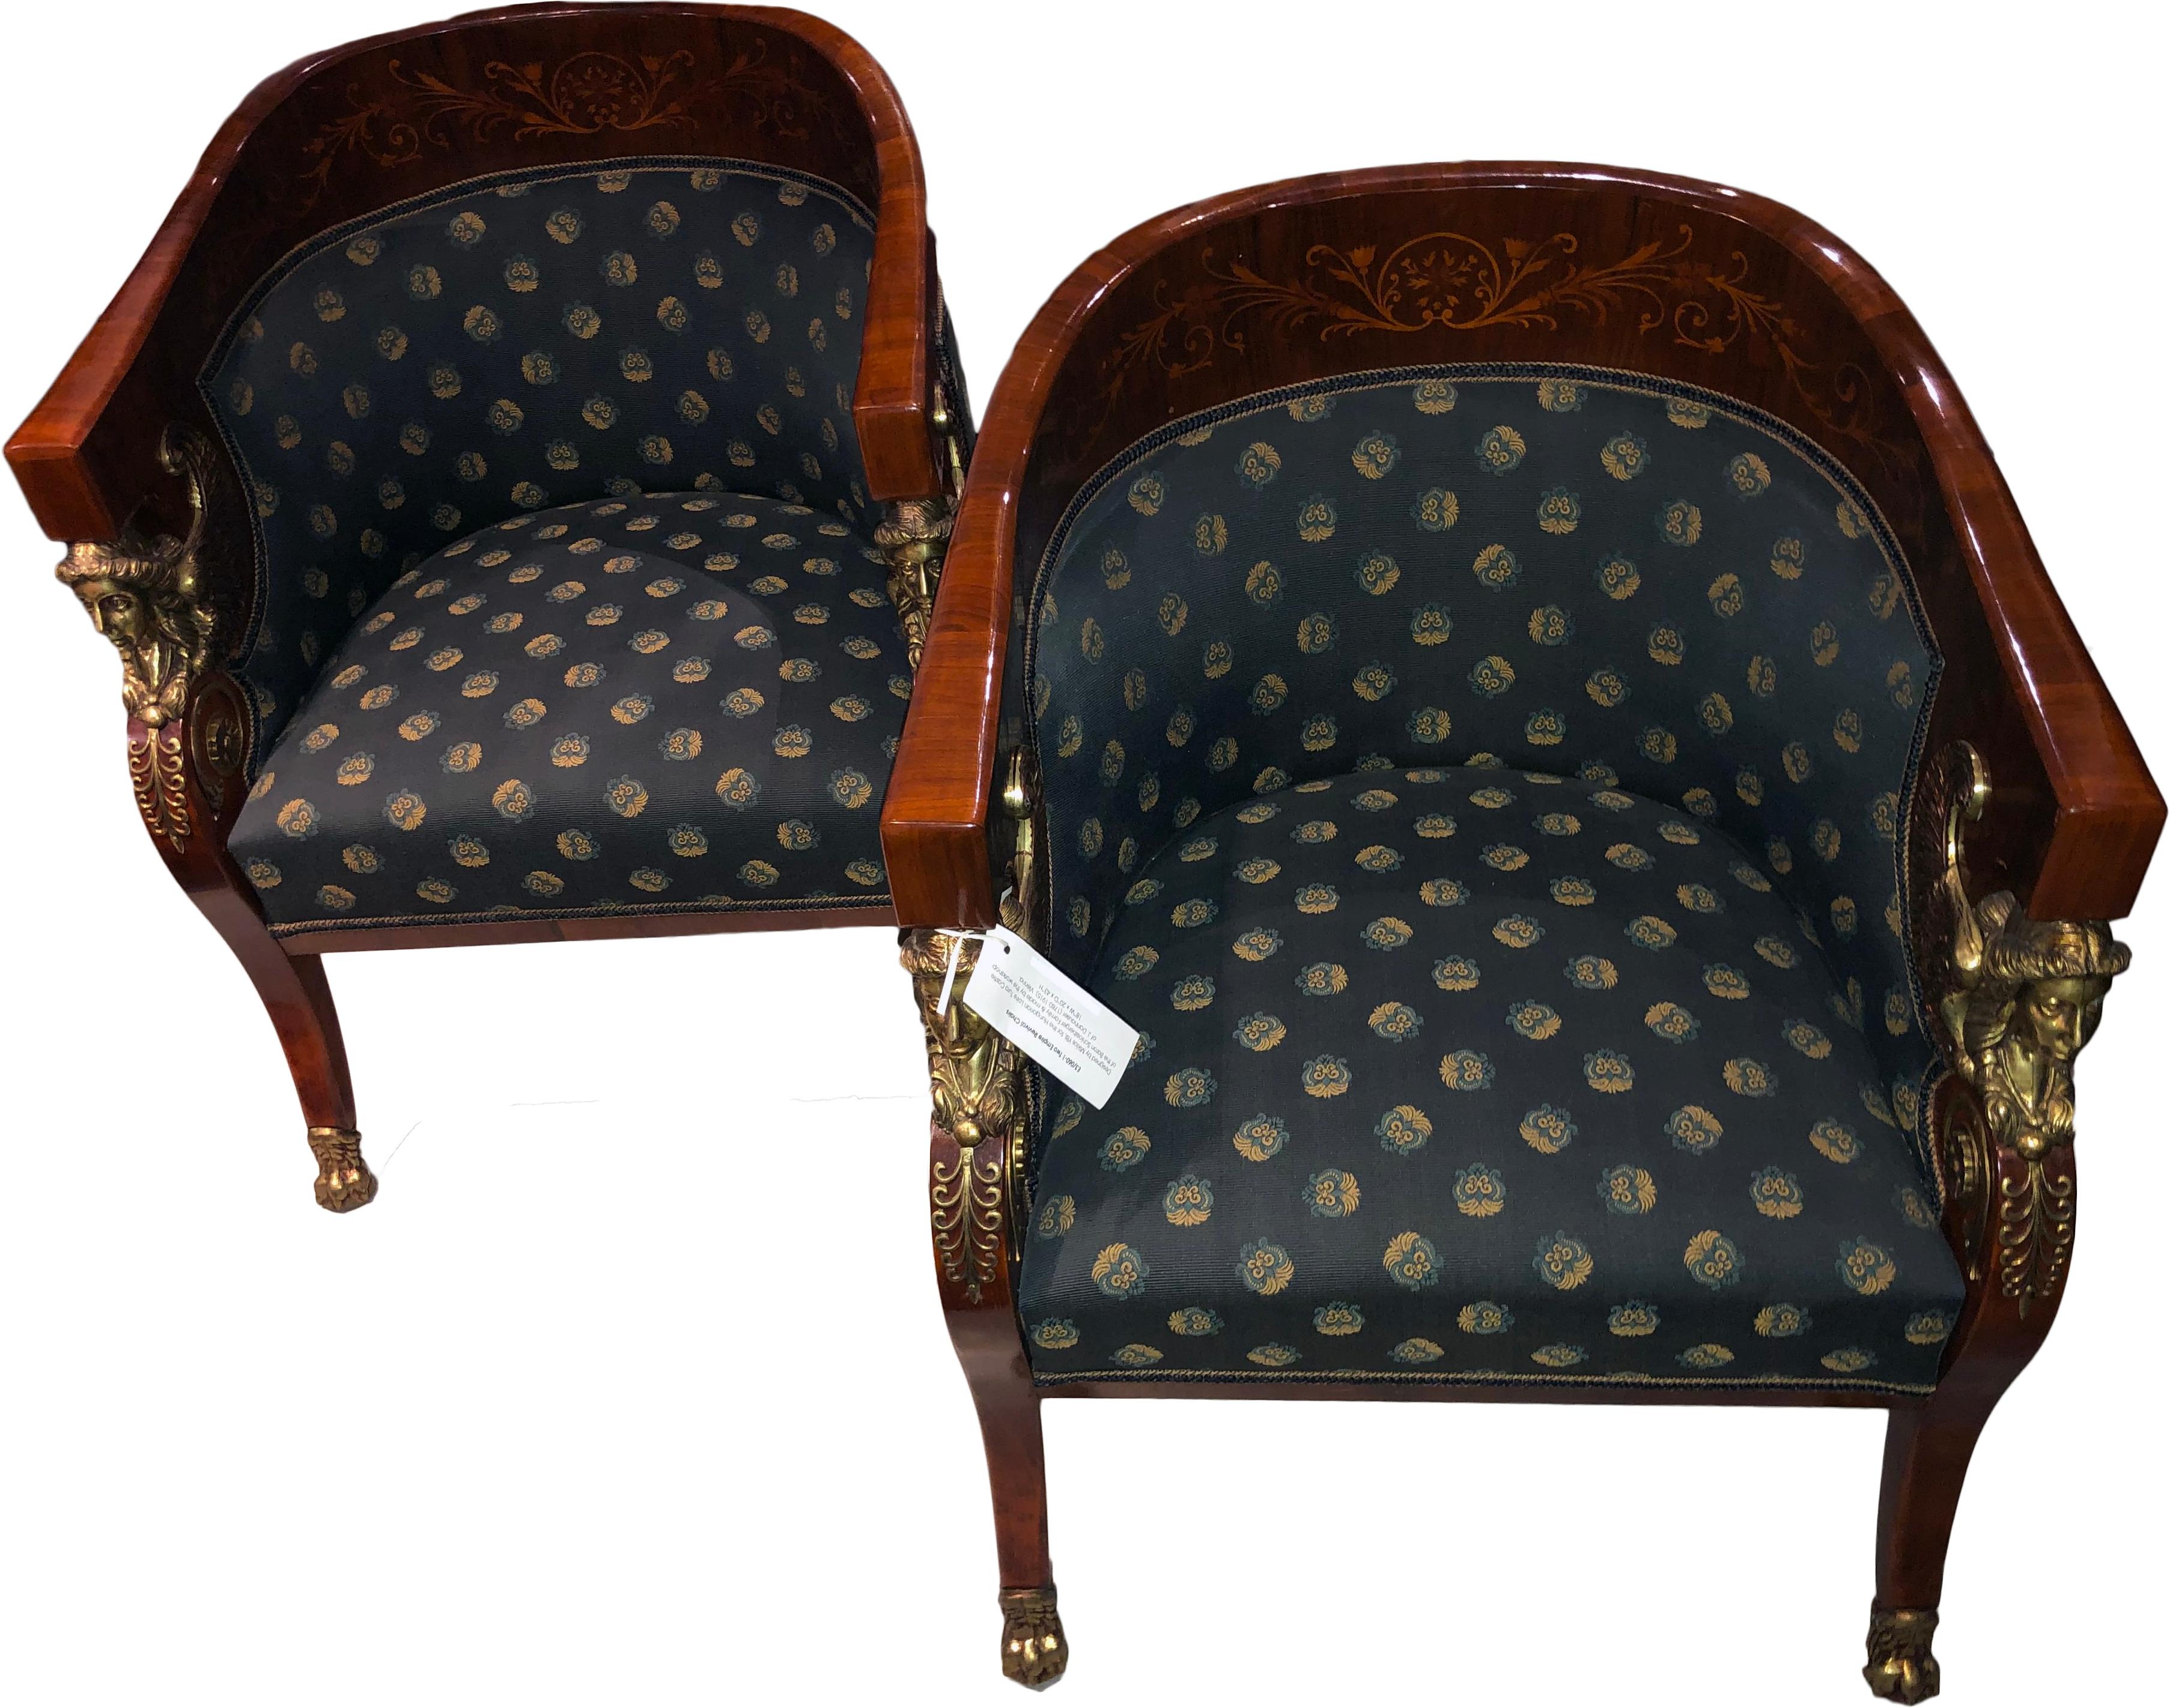 2 Empire Revival Chairs – pieces were designed for the Hungarian Loire Tura Castle (designed by Miklos YBL) of the Baron Schlossberger Family & first made by the workshop of J. Danhauser (1780-1915), Vienna. Later pieces of this furniture were